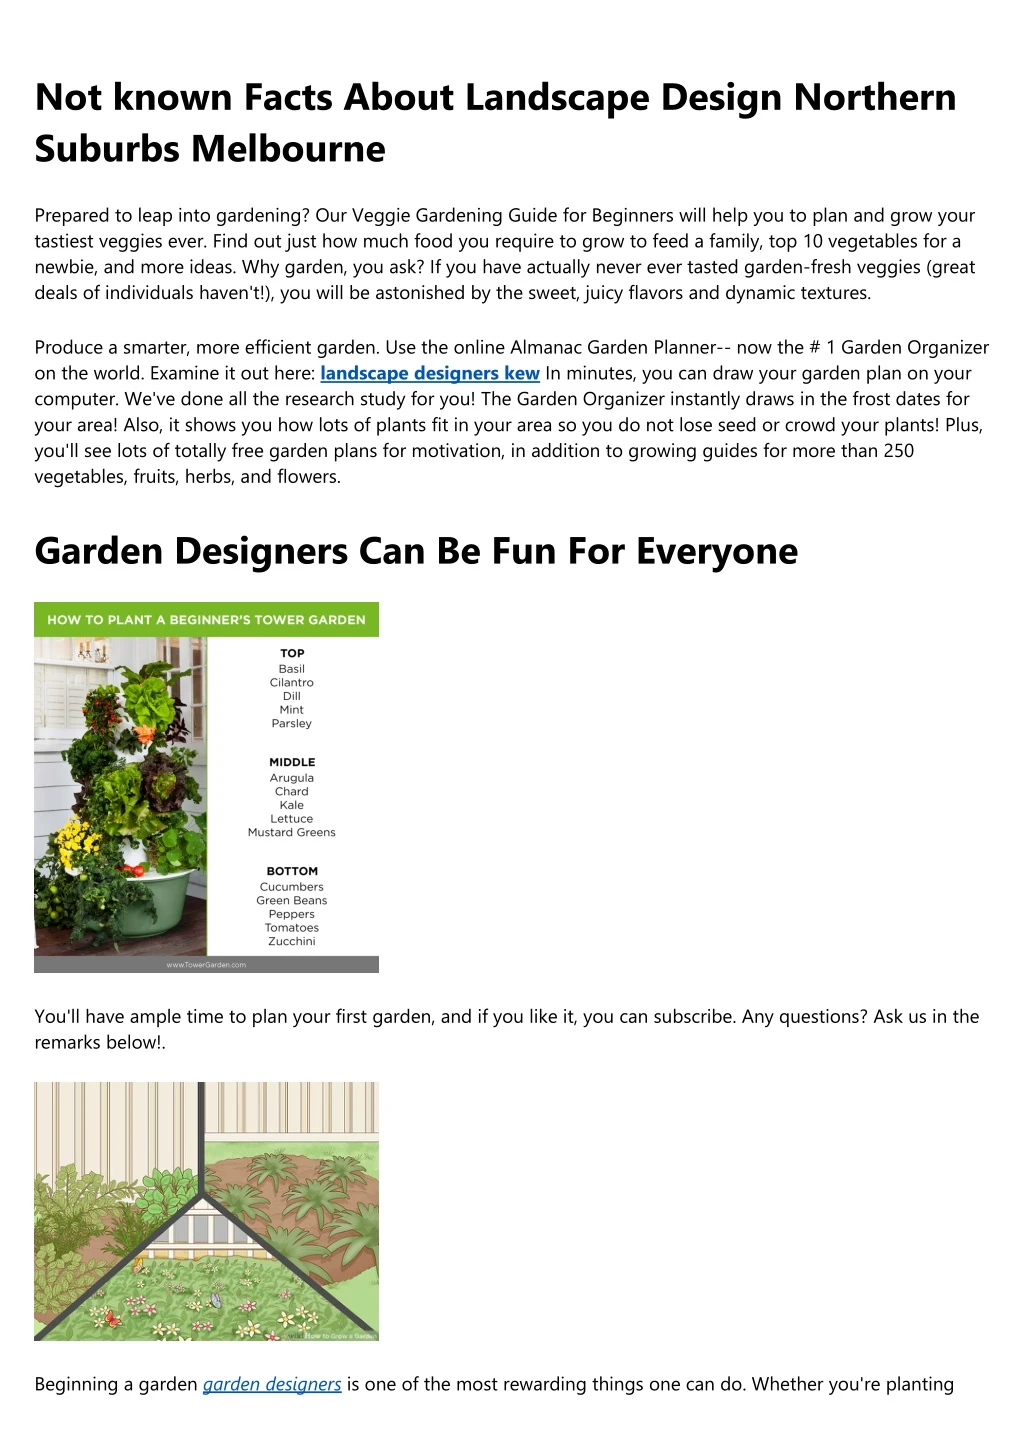 not known facts about landscape design northern